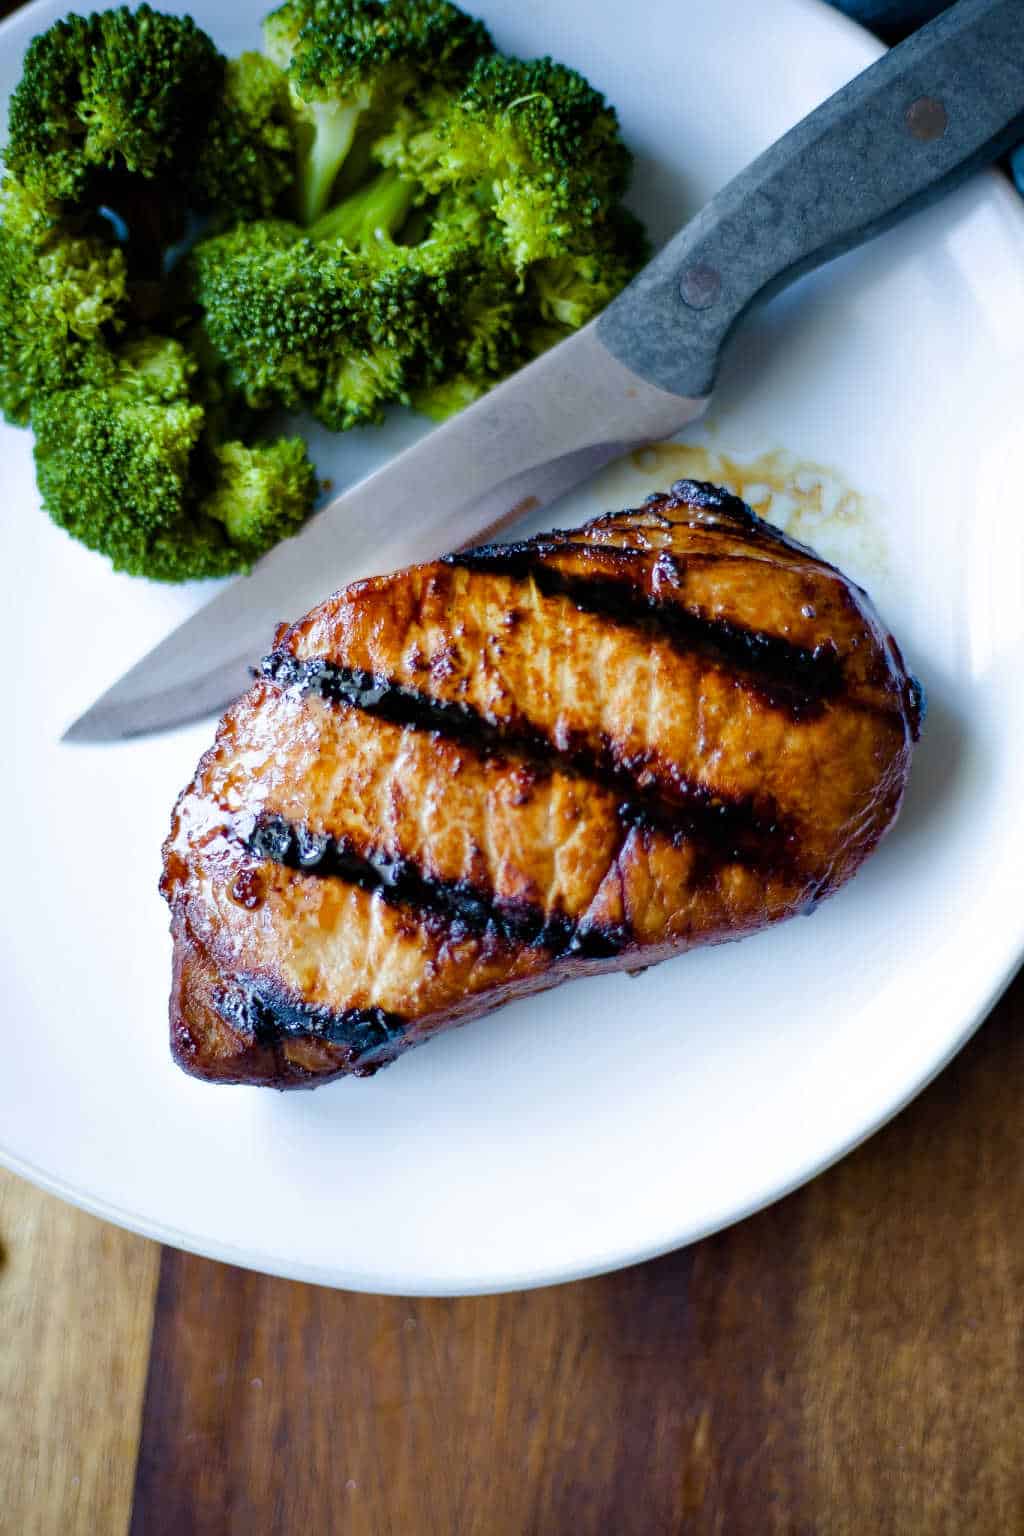 grilled pork chop on white plate with steak knife and broccoli